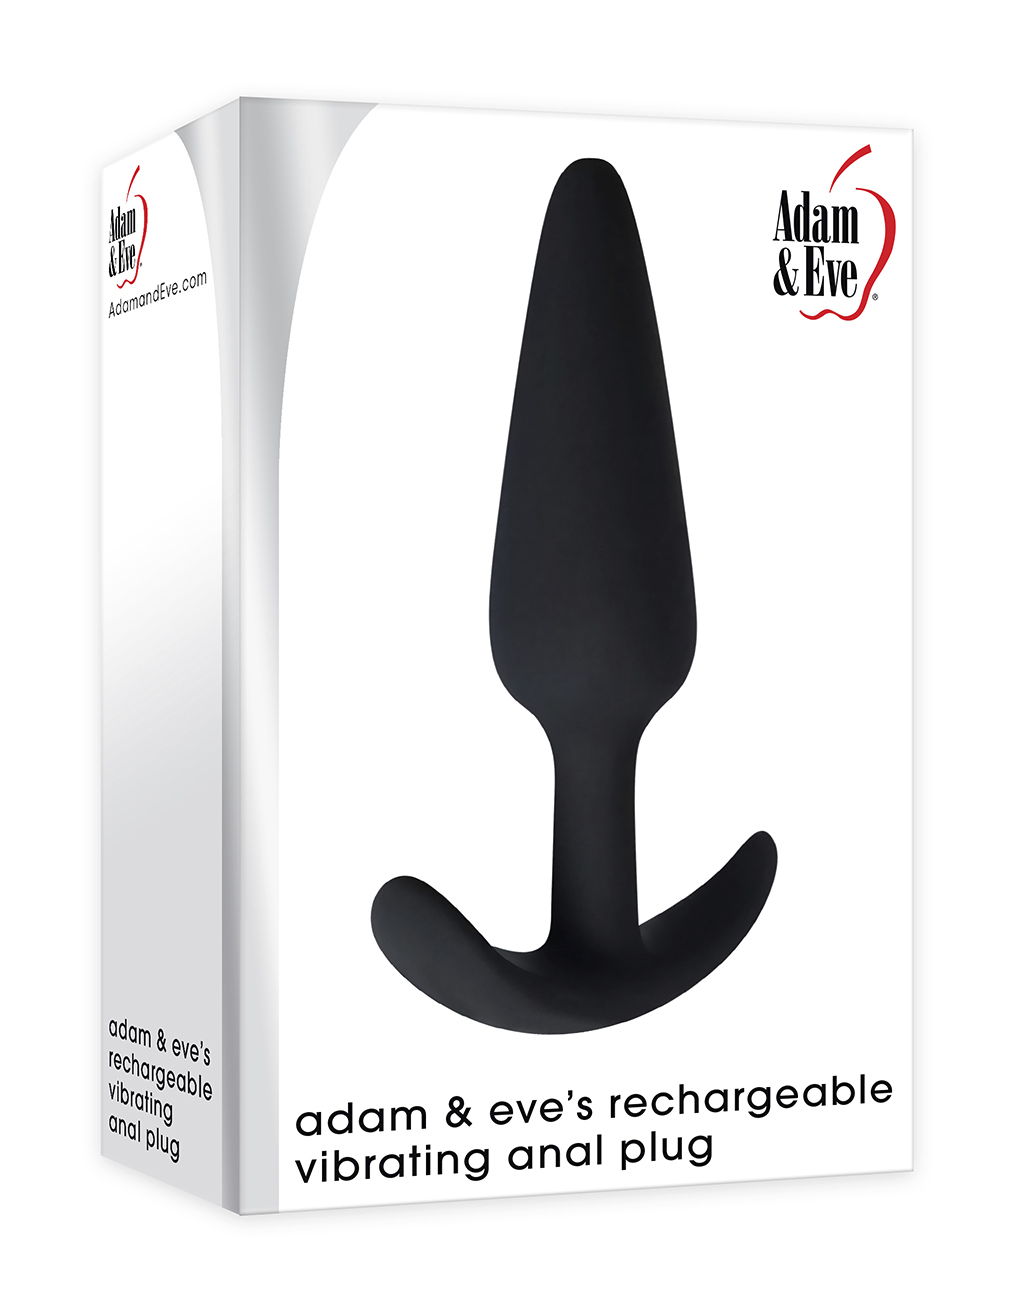 (WD) ADAM & EVE'S RECHARGEABLE VIBRATING ANAL PLUG